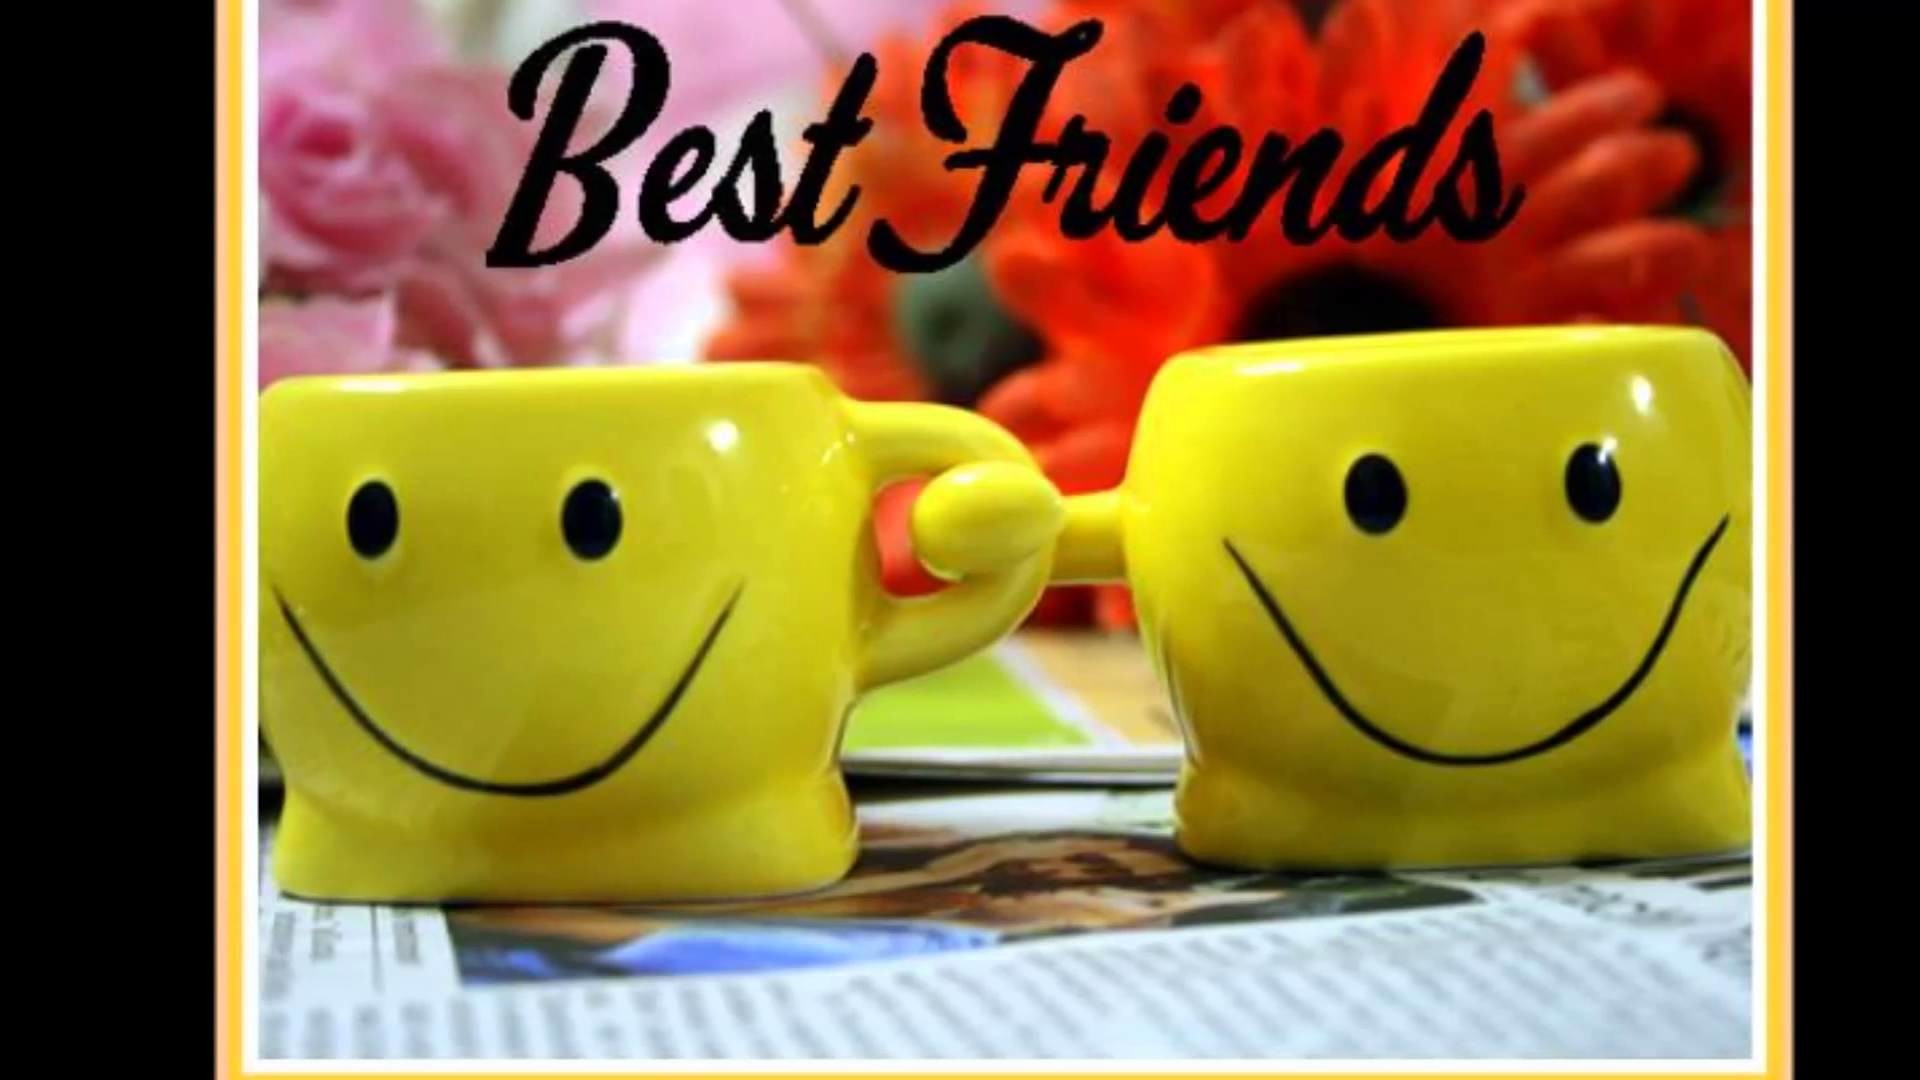 1920x1080 Happy friendship day 2015 Wishes,SMS,Messages,Wallpapers Quotes,Images,Greetings  - YouTube